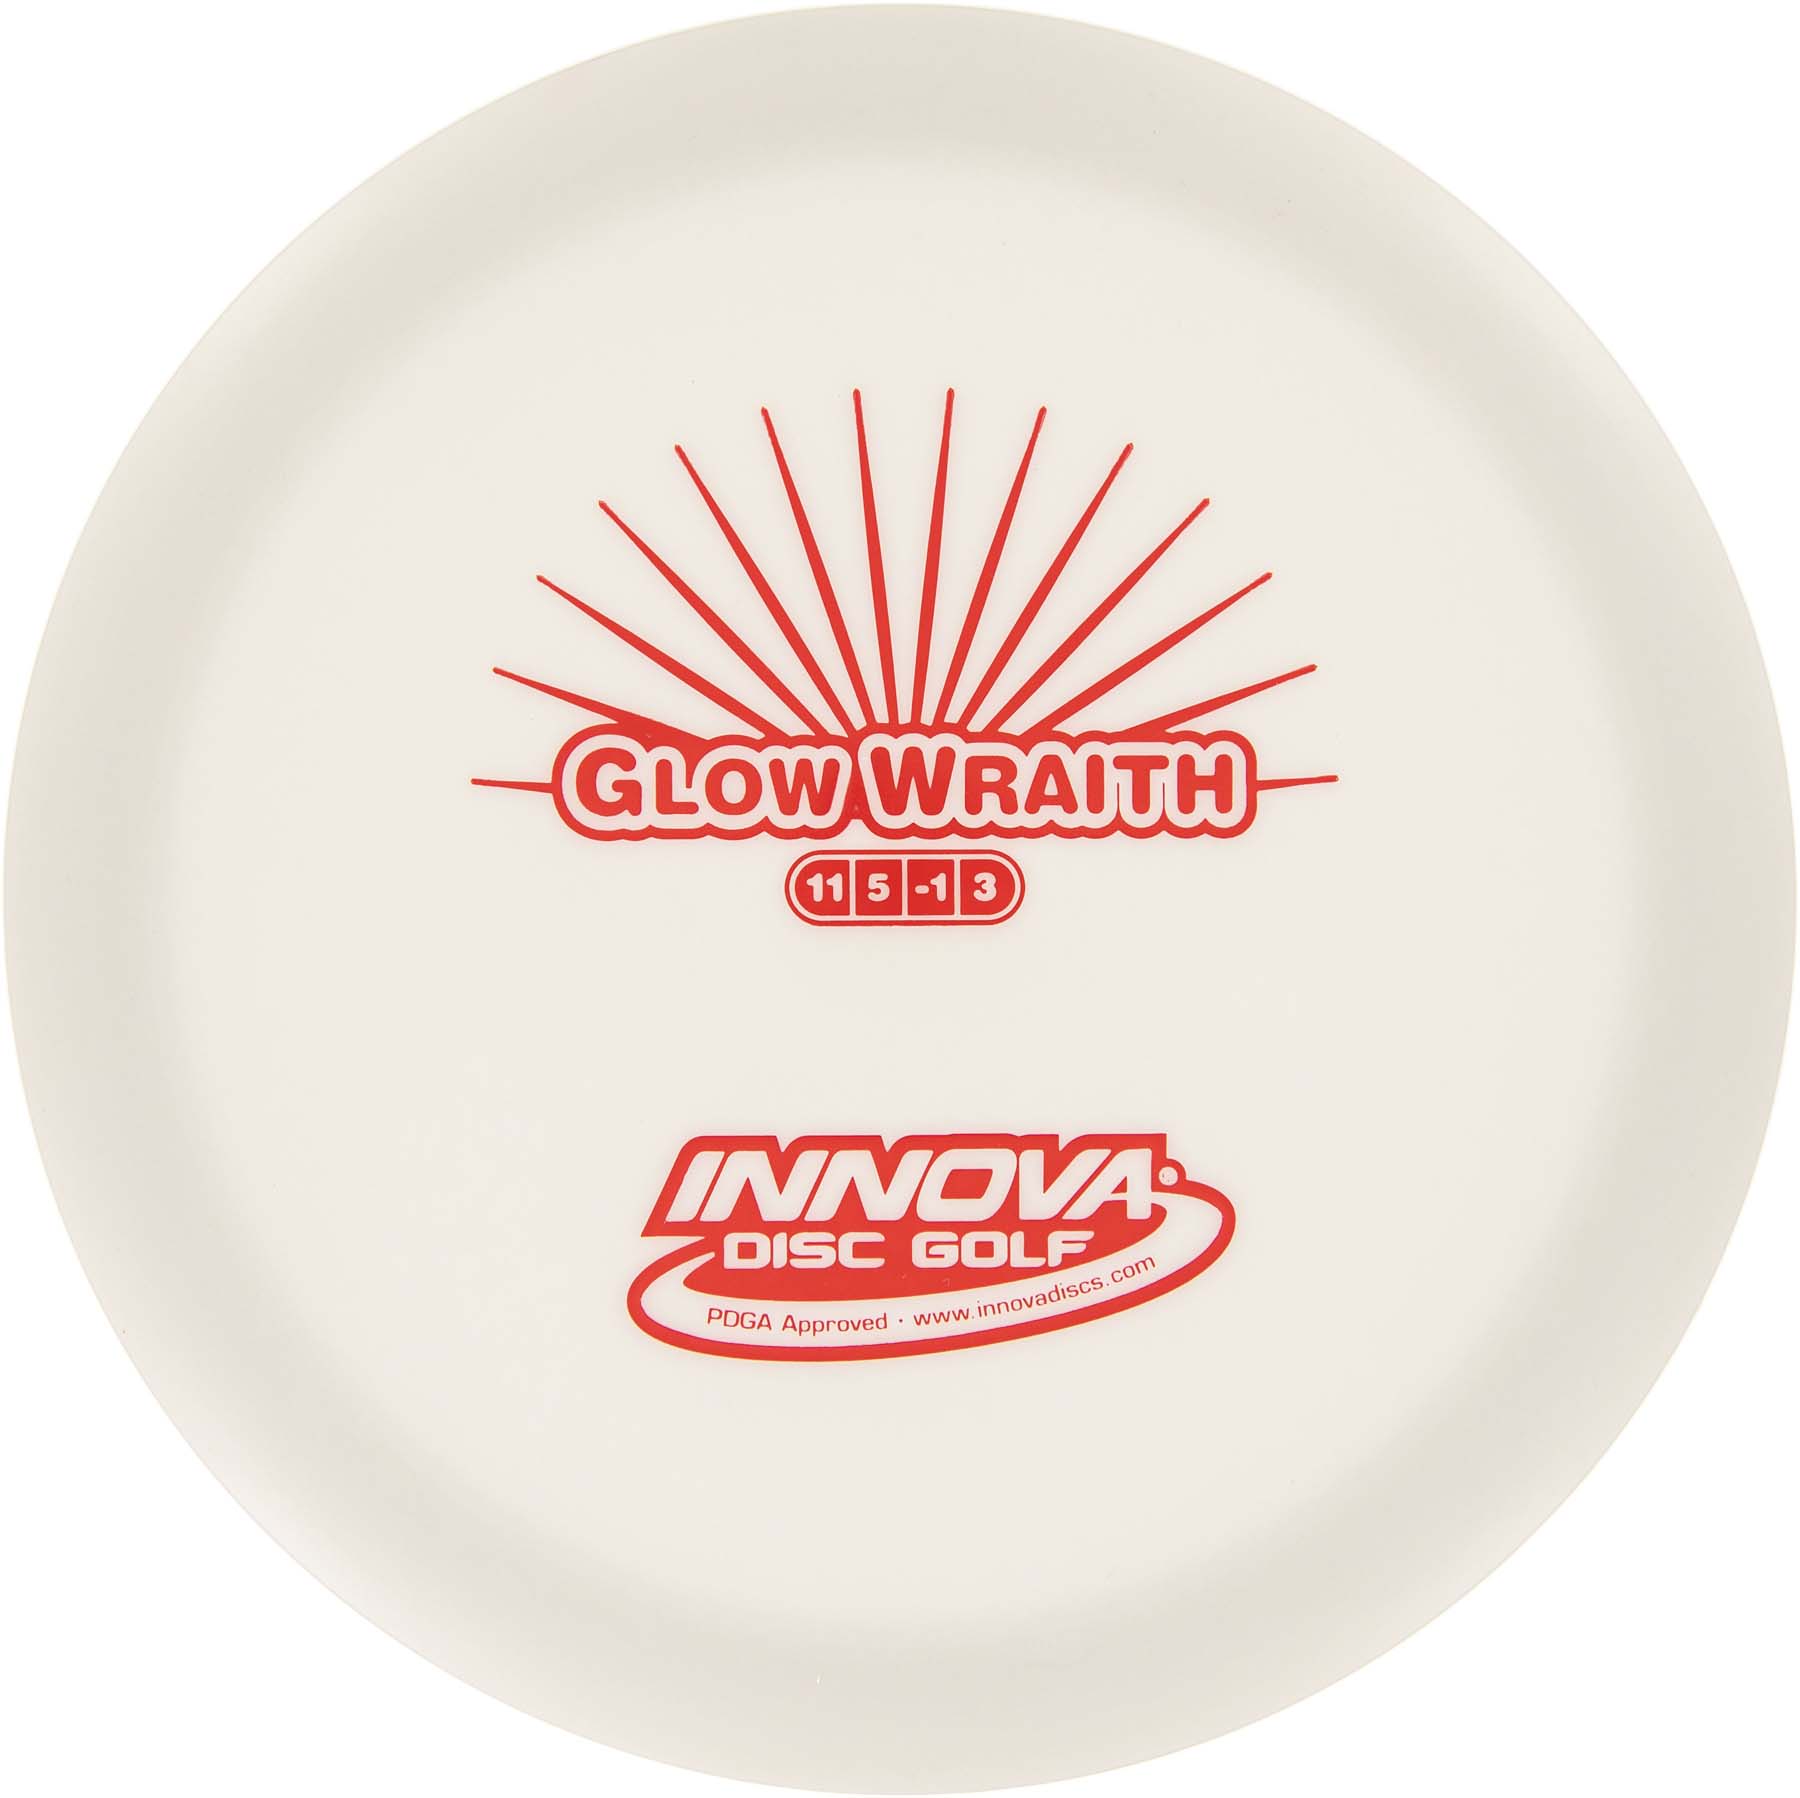 Classic Glow DX Wraith from Disc Golf United